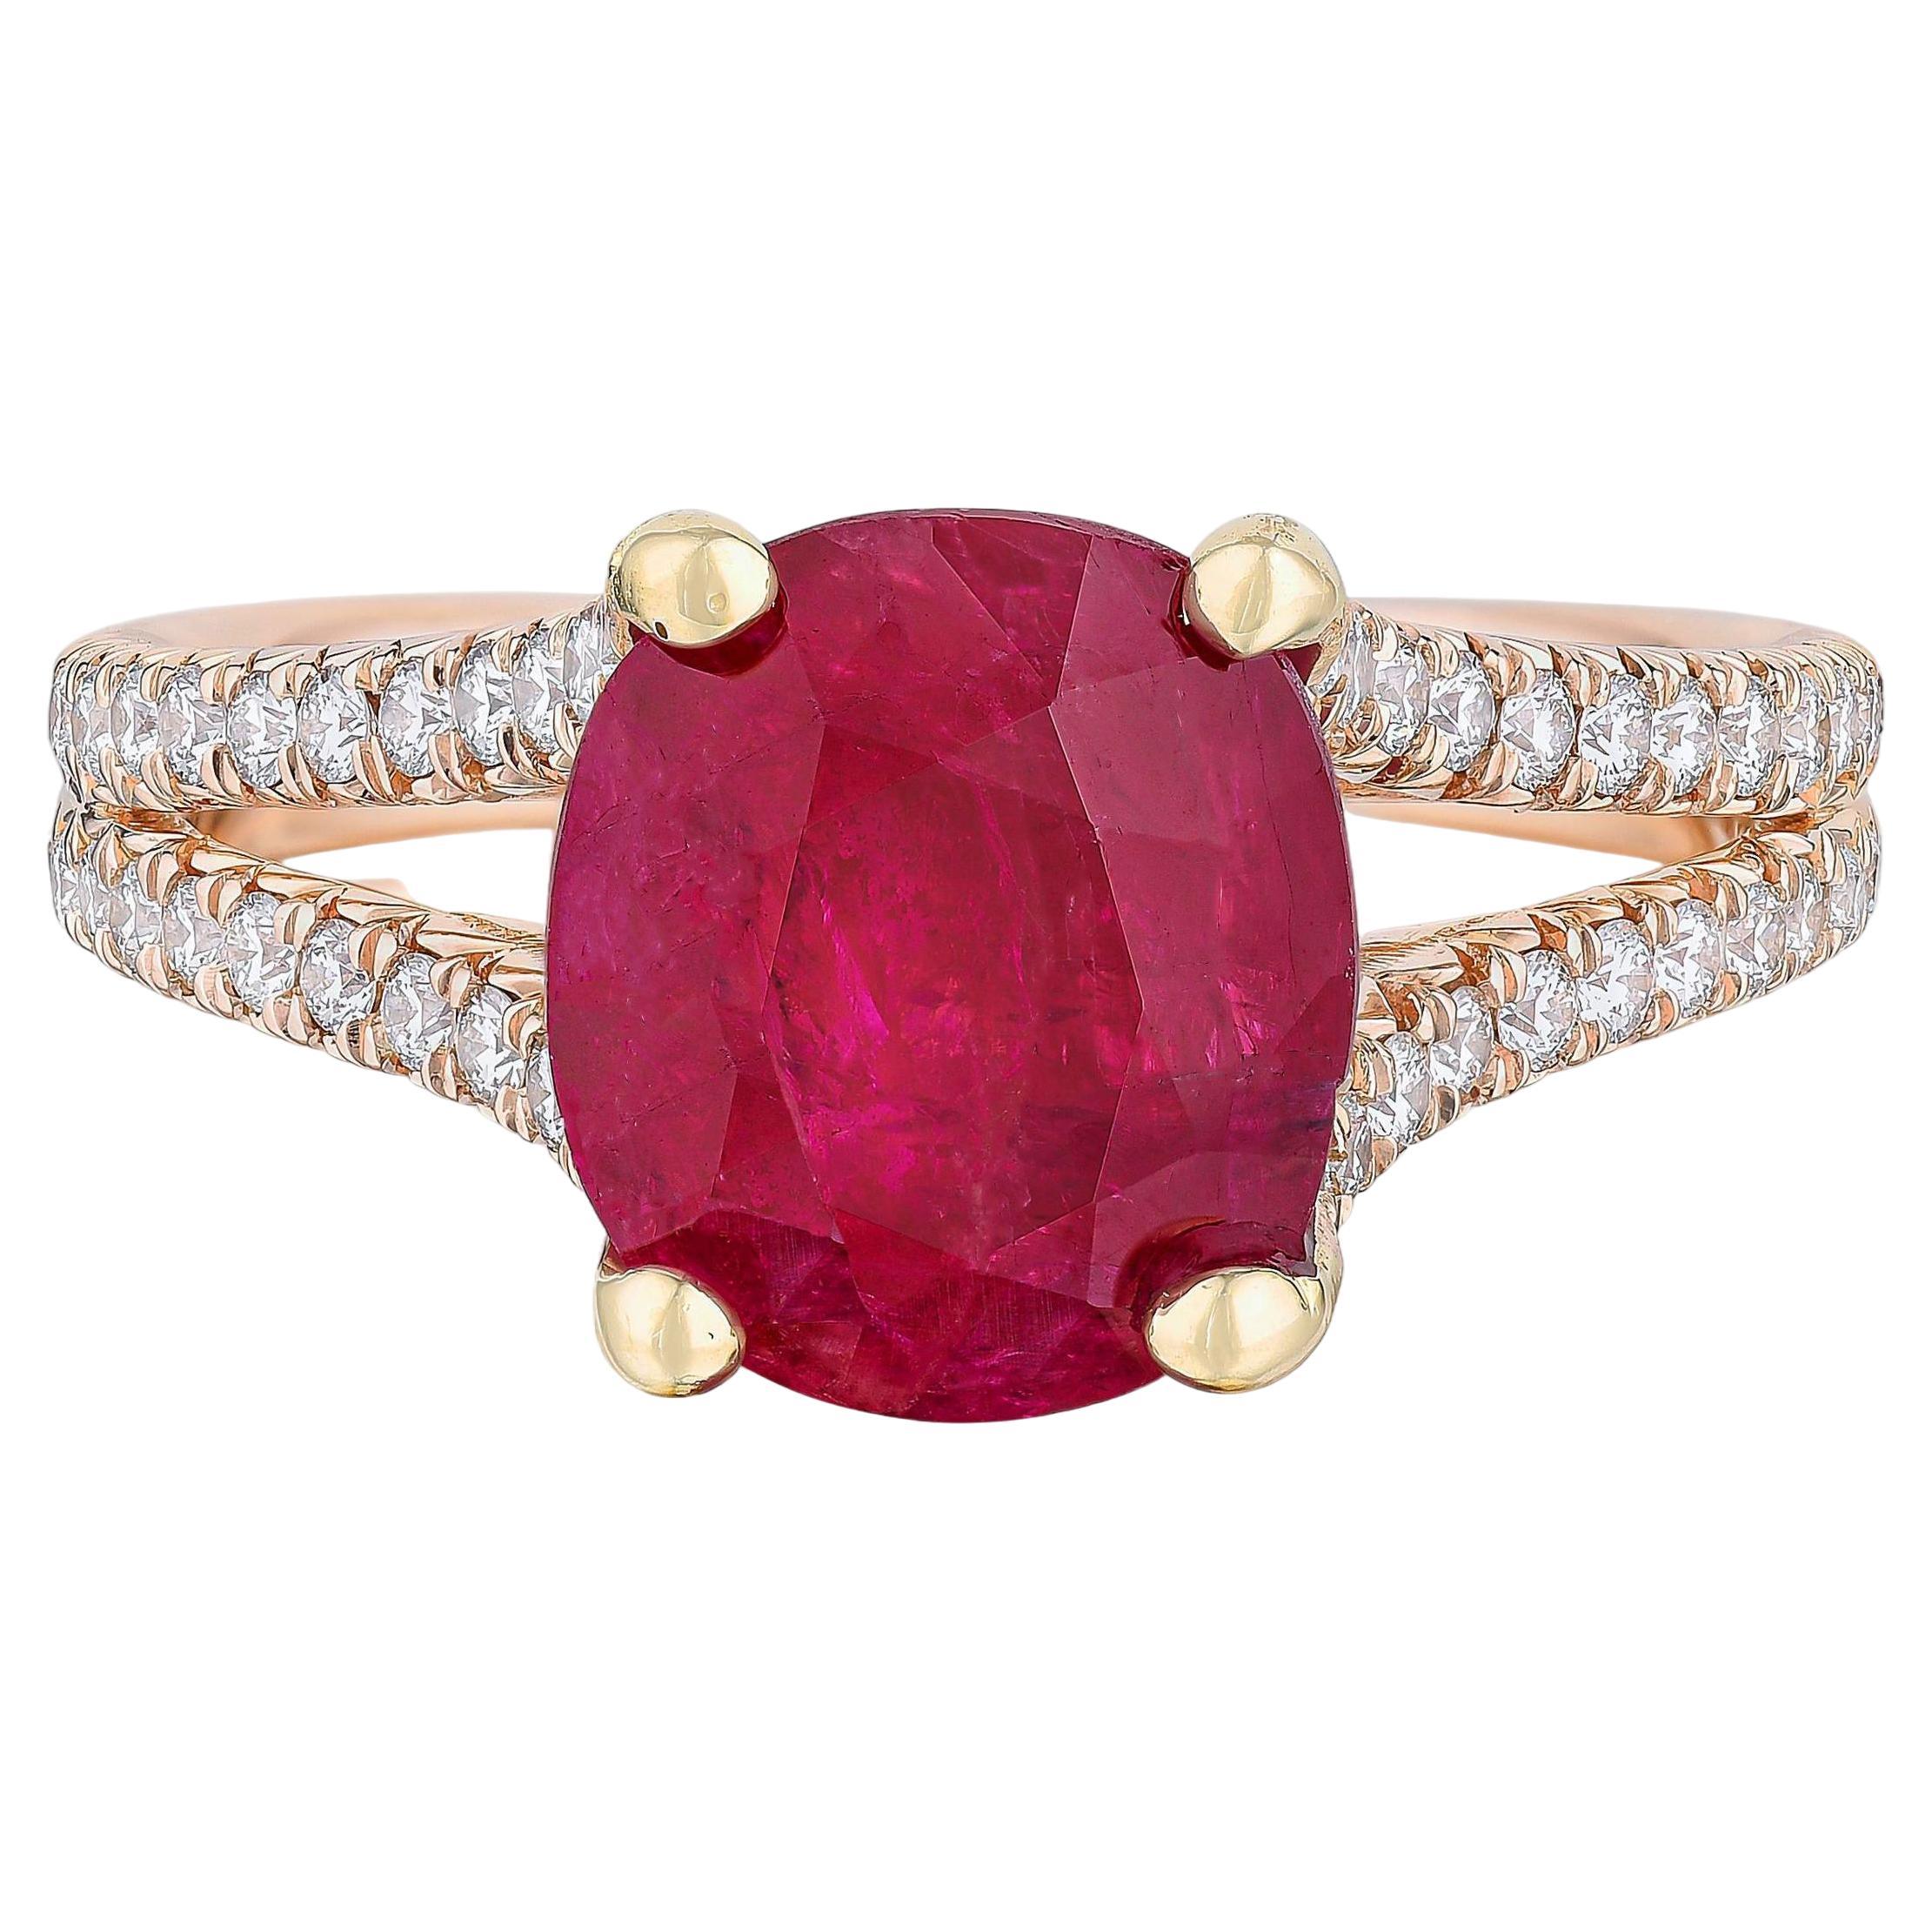 Important Rare GIA Certified 3.68 Carat Natural Burma Unheated Ruby Ring For Sale